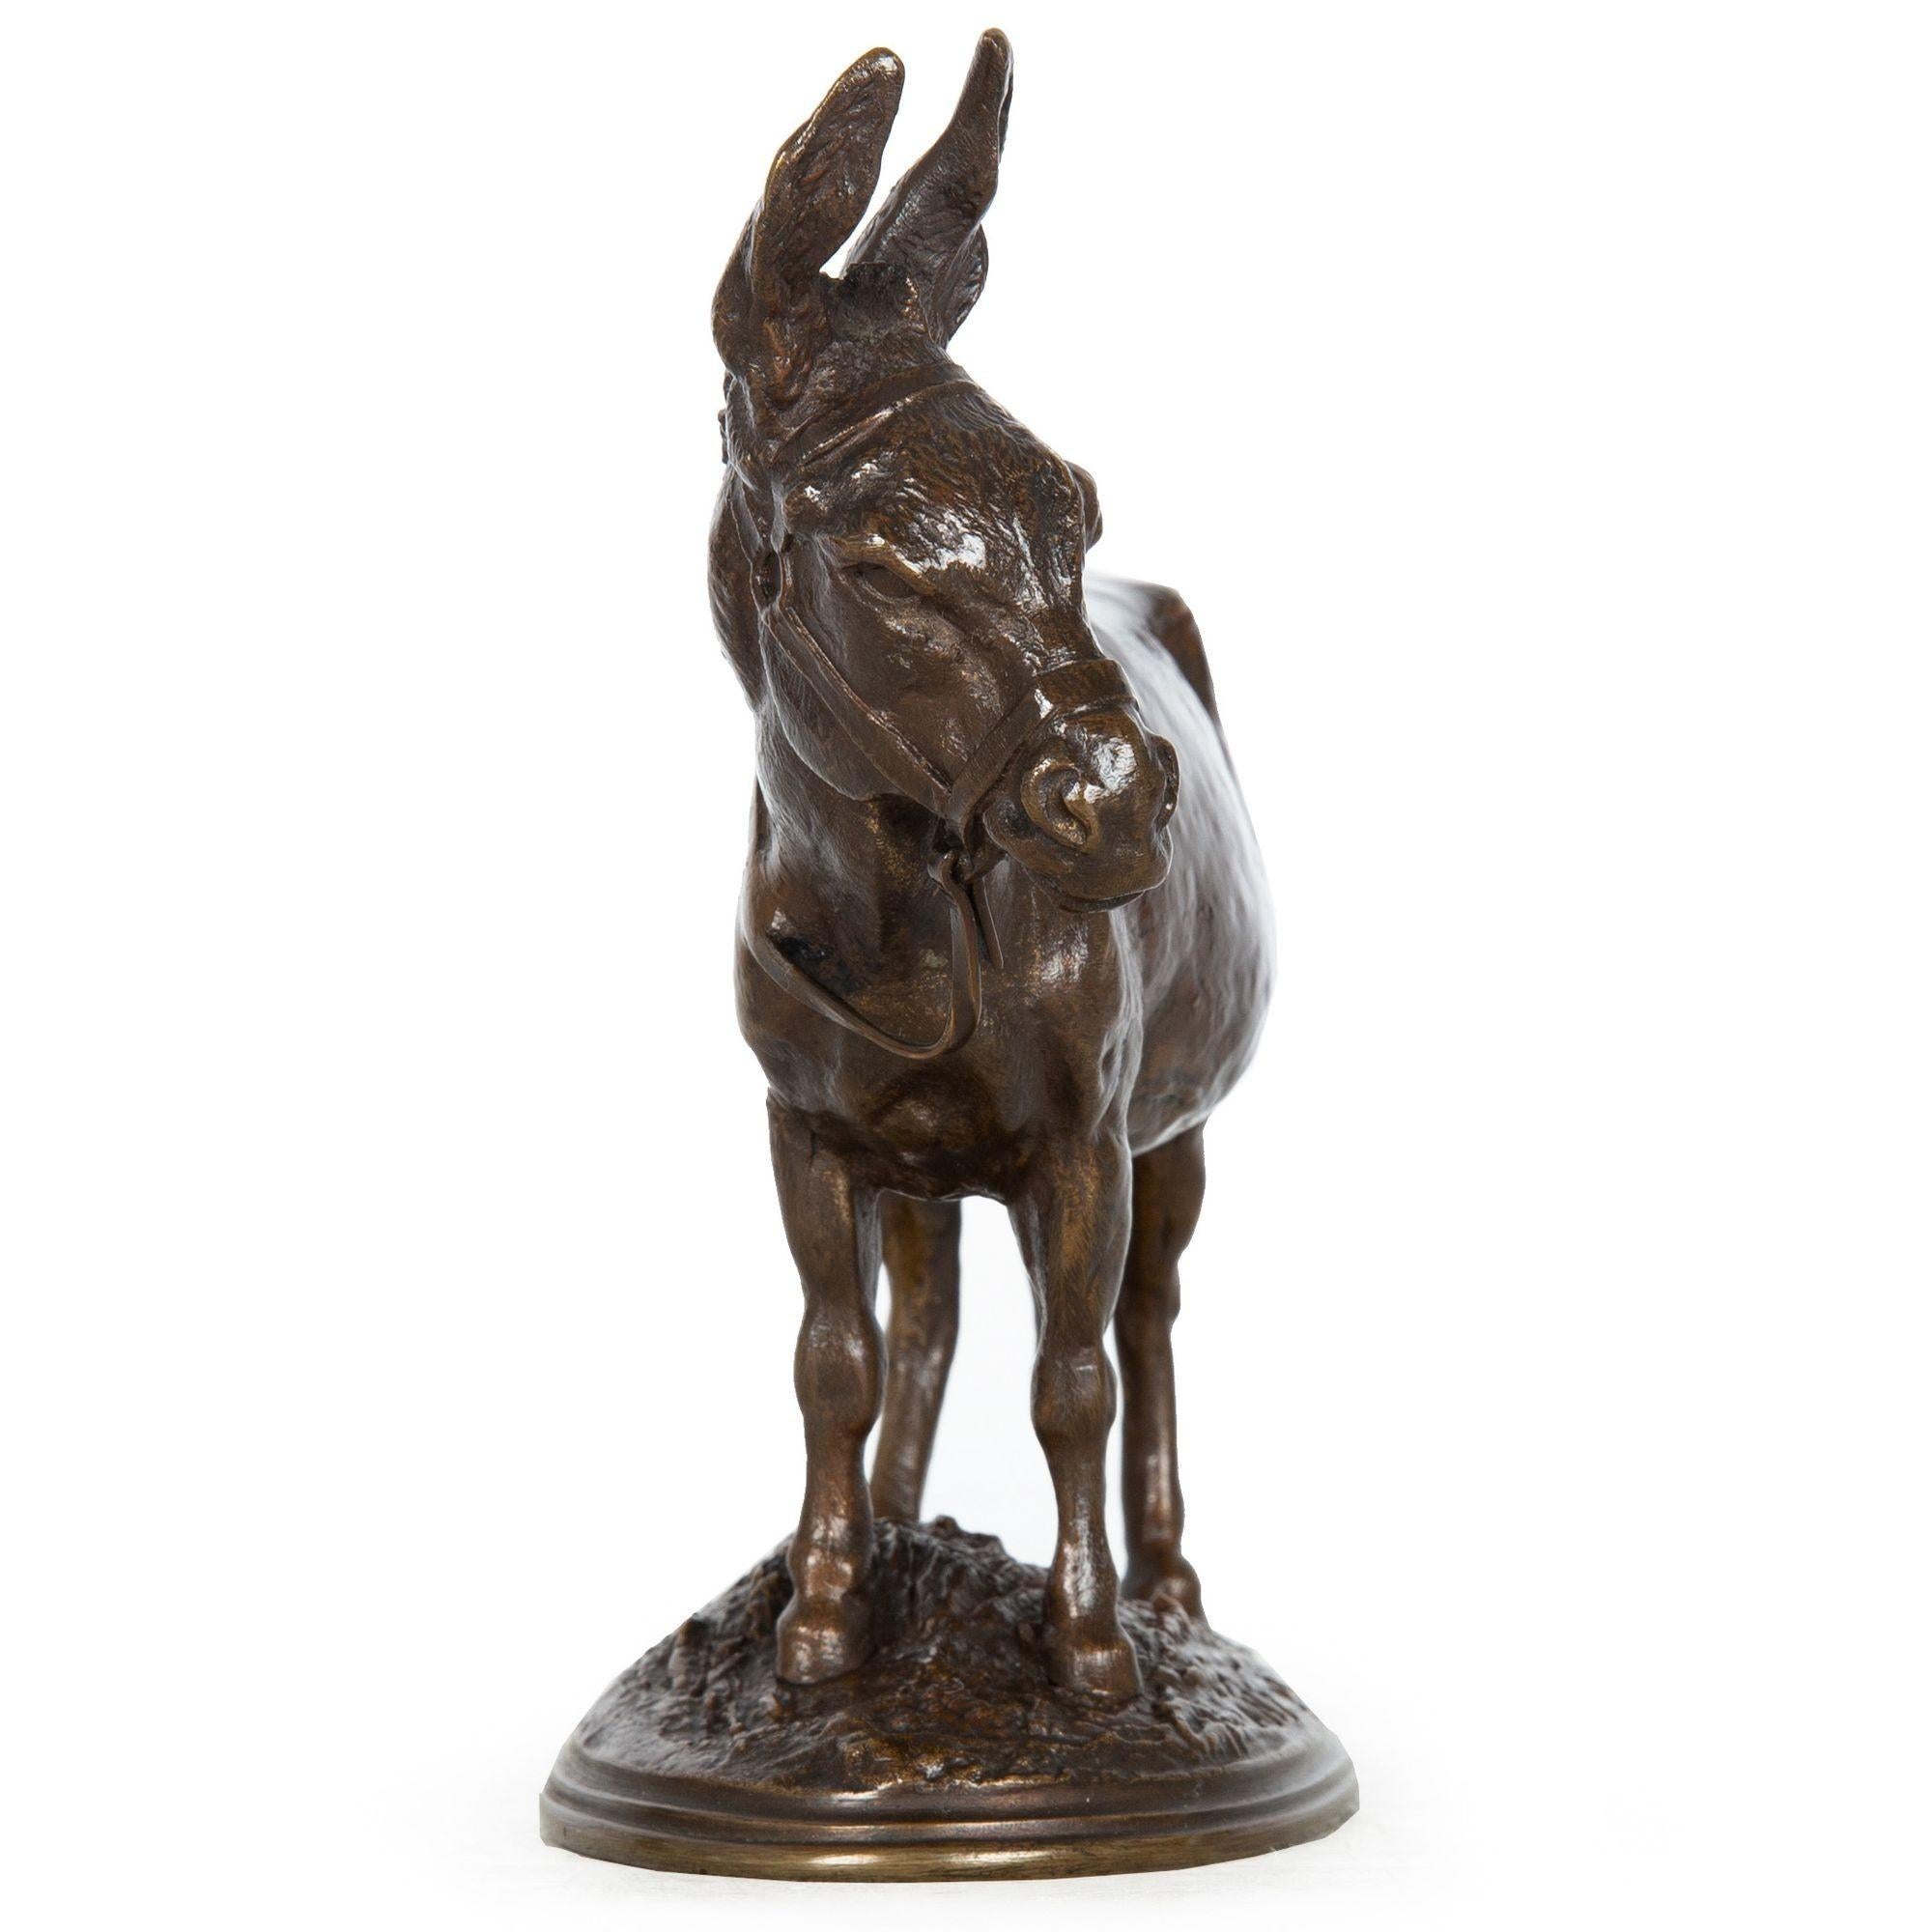 Romantic French Antique Bronze Sculpture of “African Donkey” by Auguste Cain